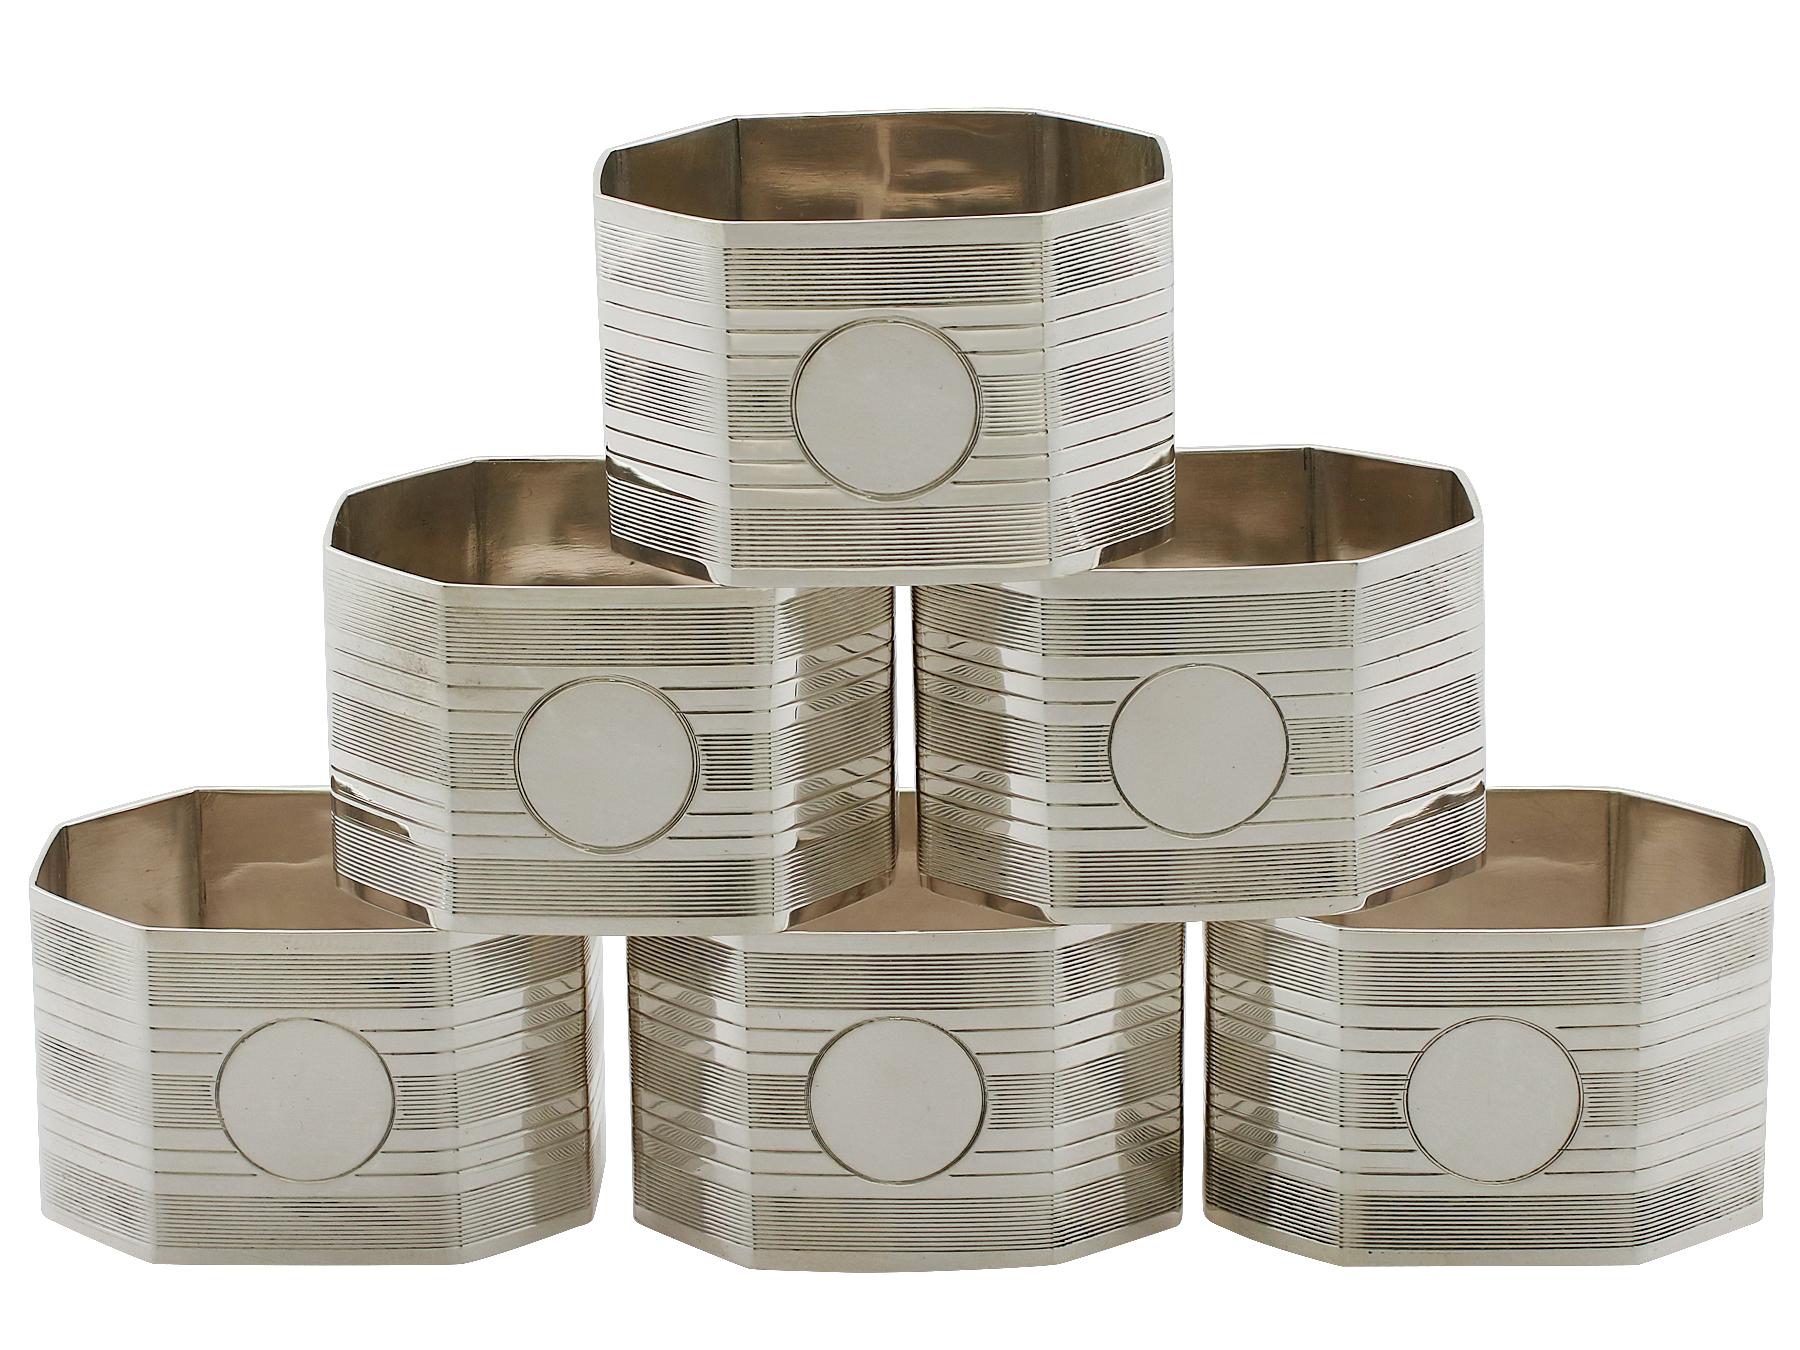 An exceptional, fine and impressive set of six antique George V English sterling silver napkin rings - boxed; an addition to our dining silverware collection.

This exceptional set of antique George V silver napkin rings consists of six napkin